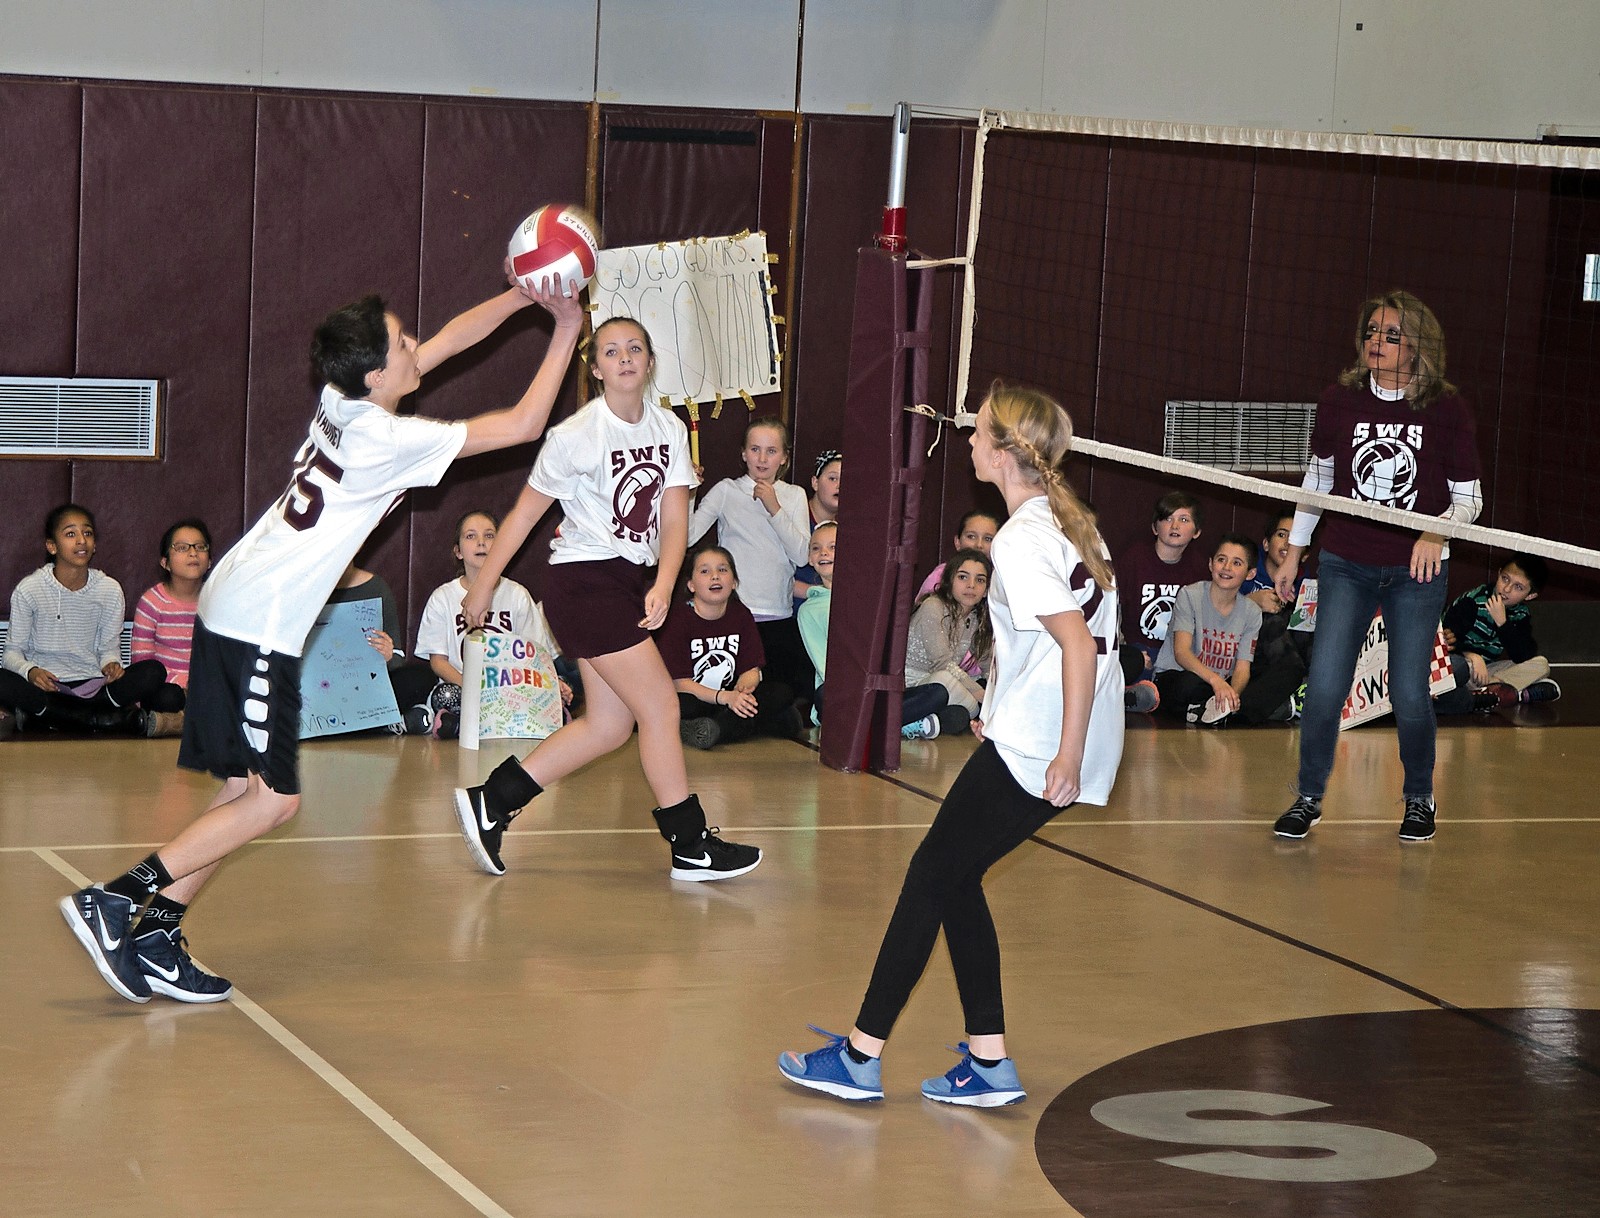 For the first time, students and teachers competed in a friendly volleyball game during Catholic Schools Week.